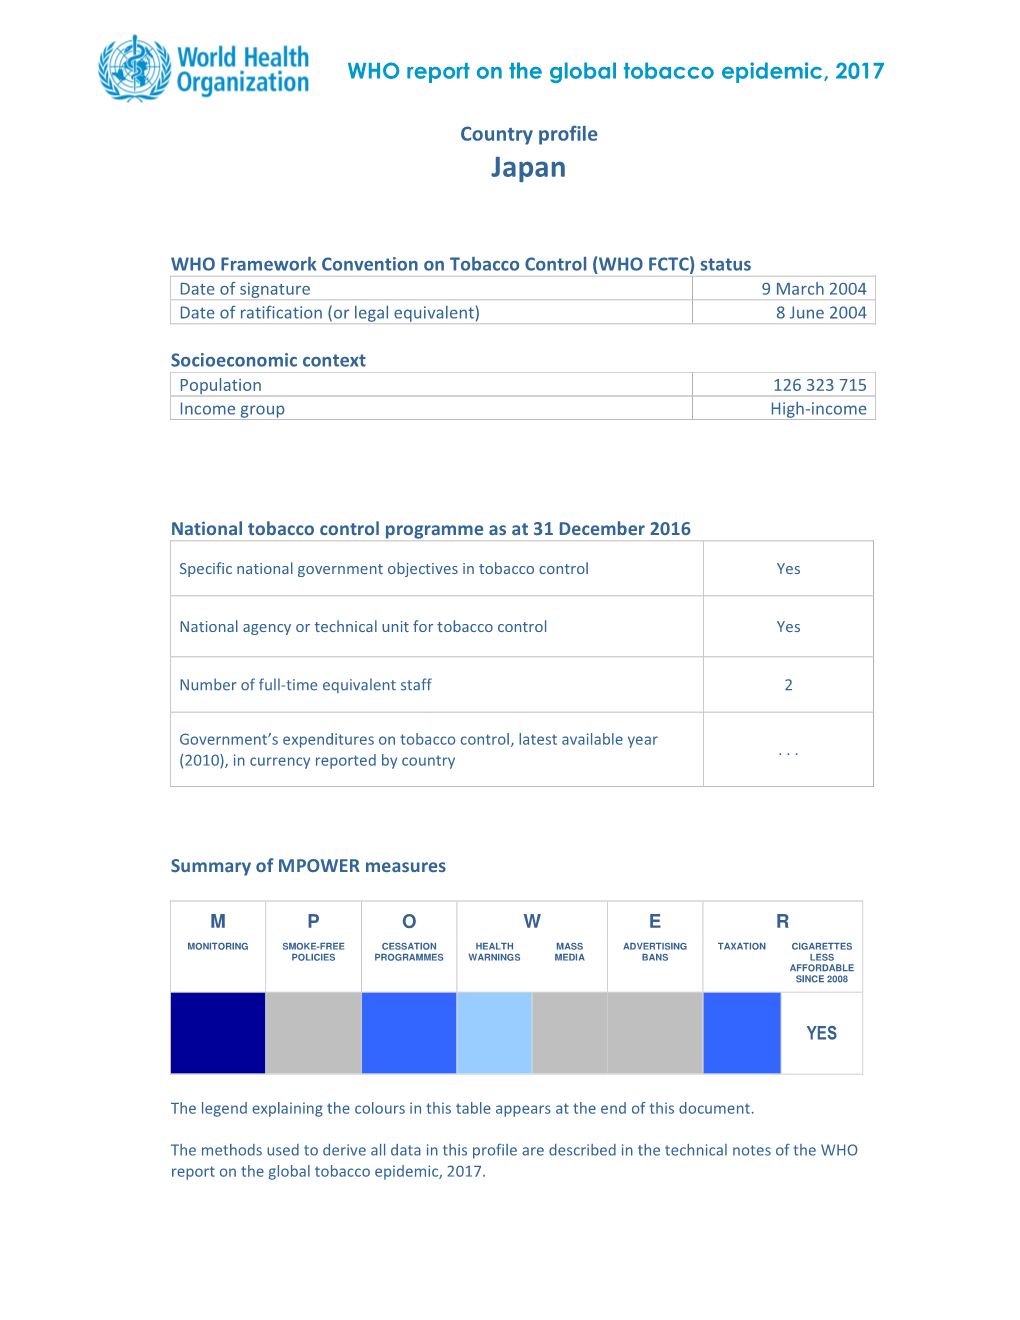 WHO Report on the Global Tobacco Epidemic, 2017 Country Profile: Japan